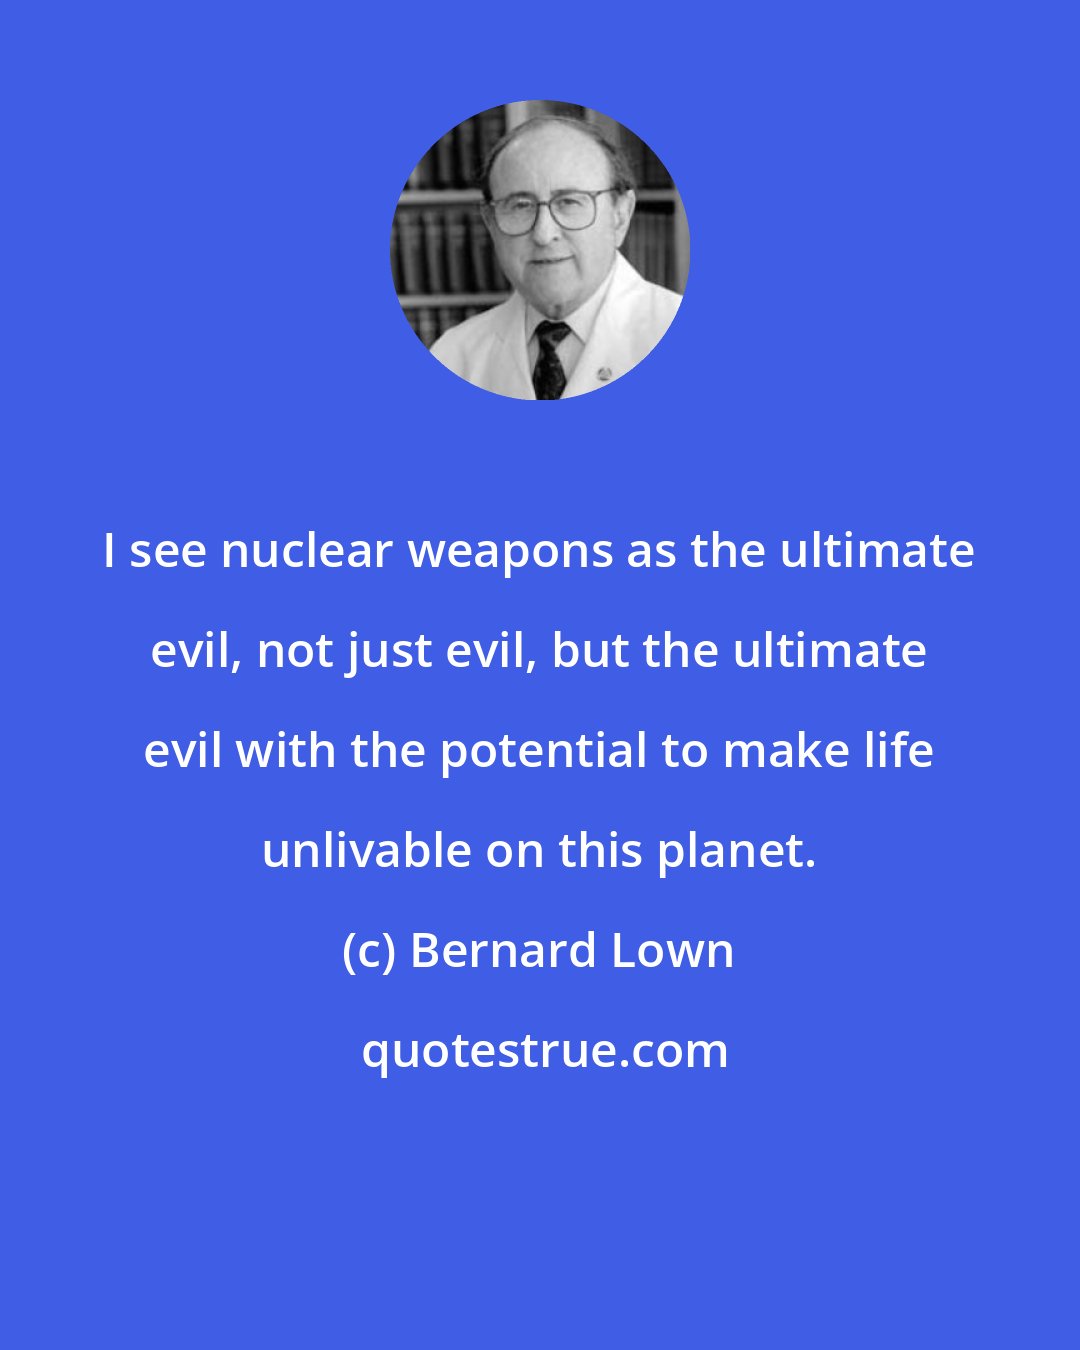 Bernard Lown: I see nuclear weapons as the ultimate evil, not just evil, but the ultimate evil with the potential to make life unlivable on this planet.